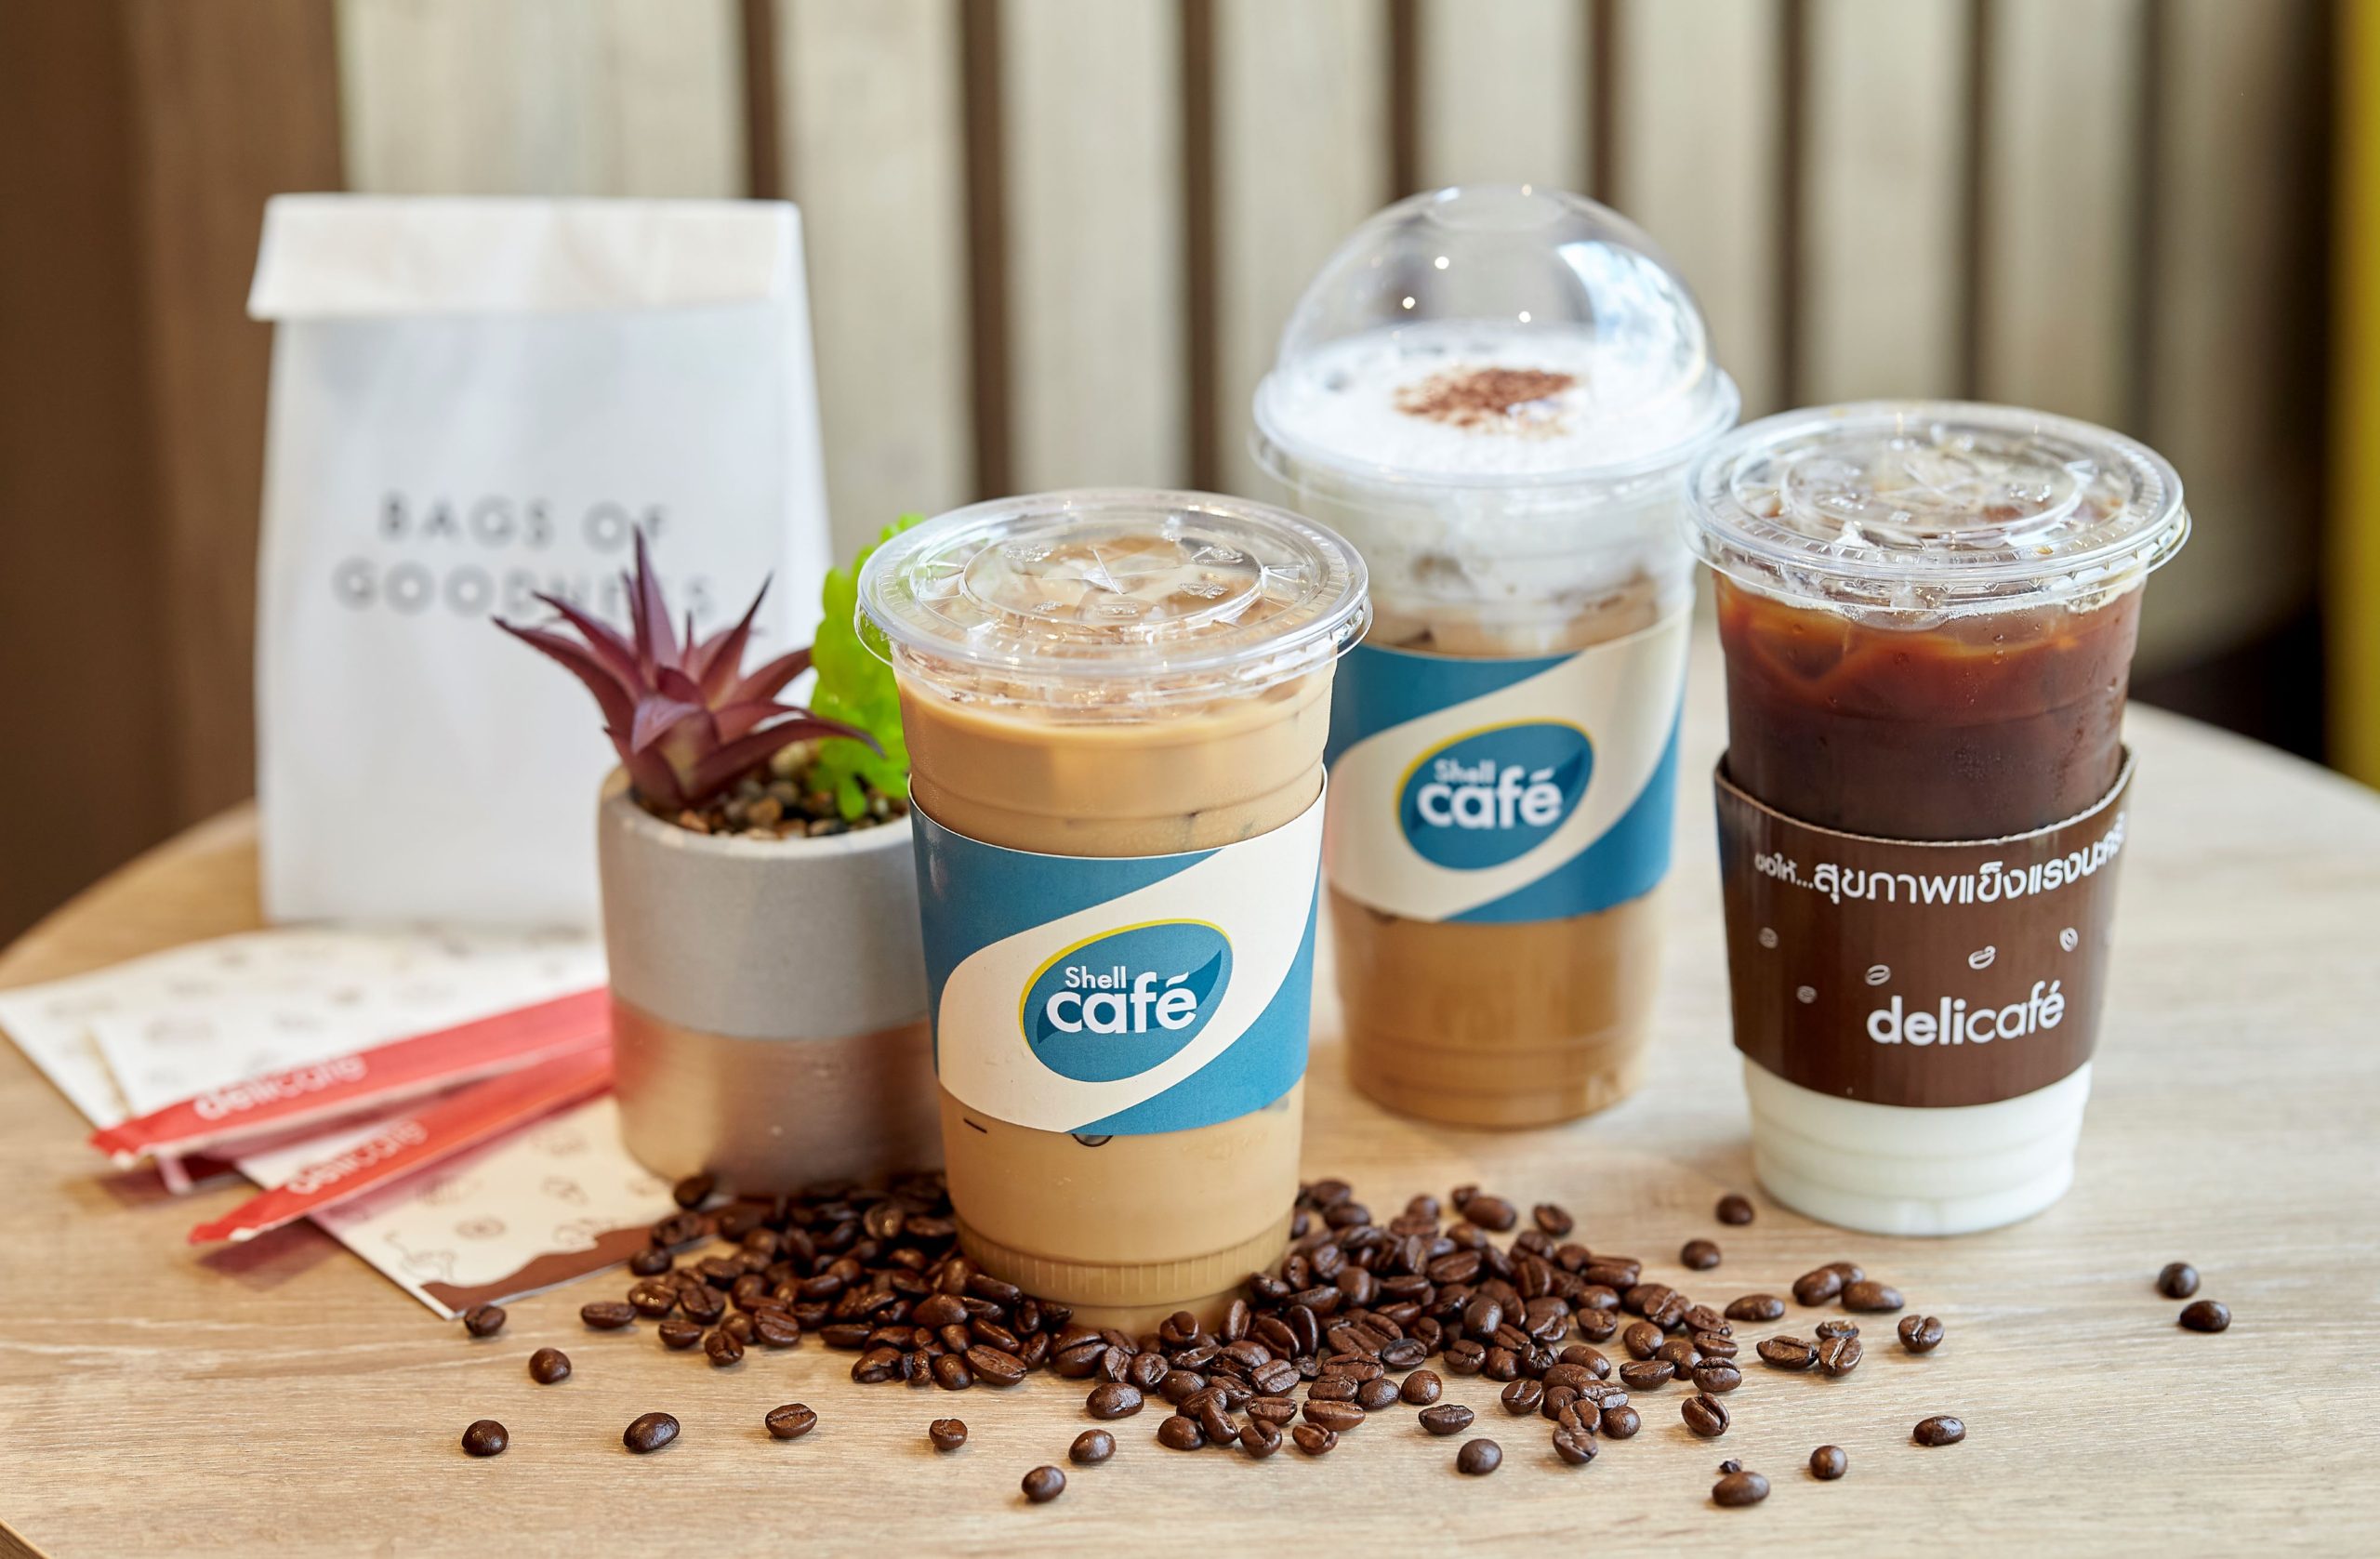 Shell Cafe และ DeliCafe Pro